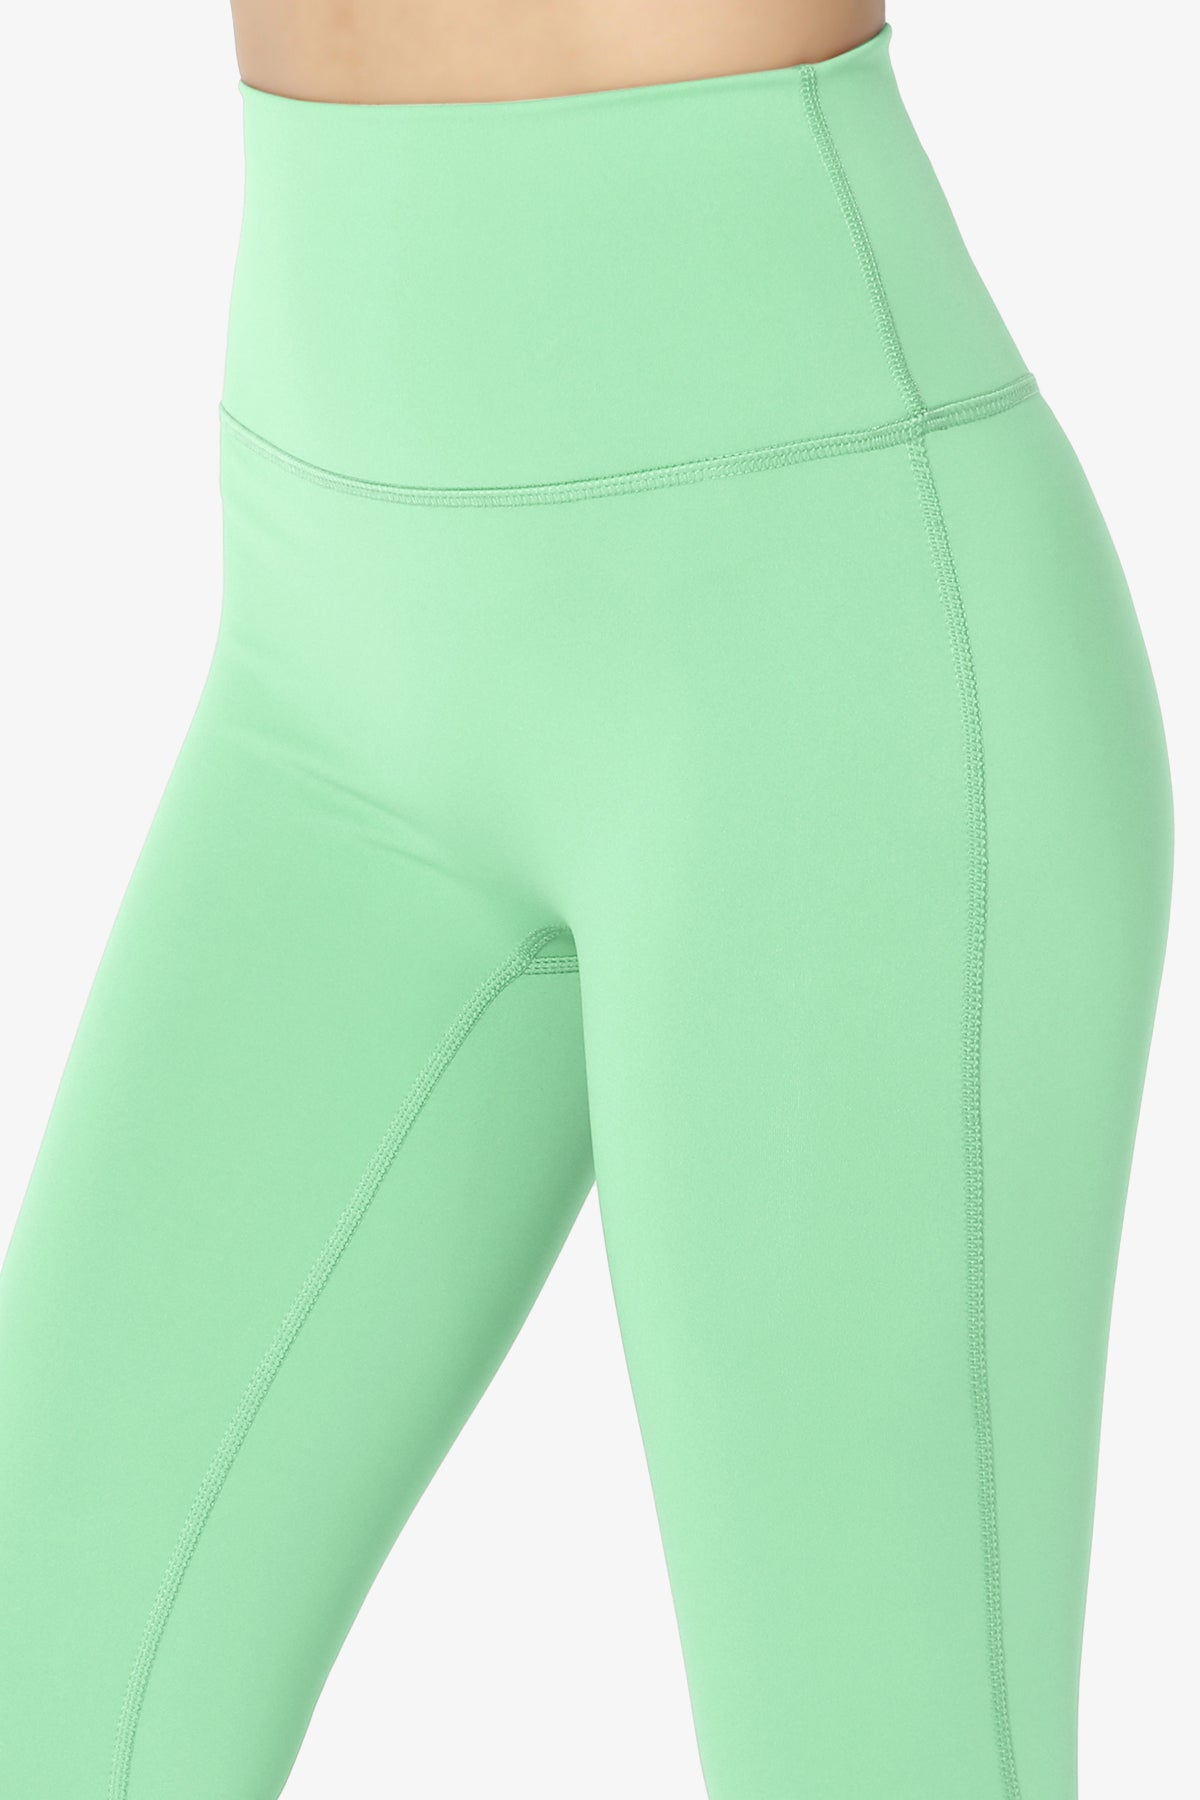 CAICJ98 Workout Leggings Thick High Waist Yoga Pants with Pockets, Tummy  Control Workout Running Yoga Leggings for Women Green,S 